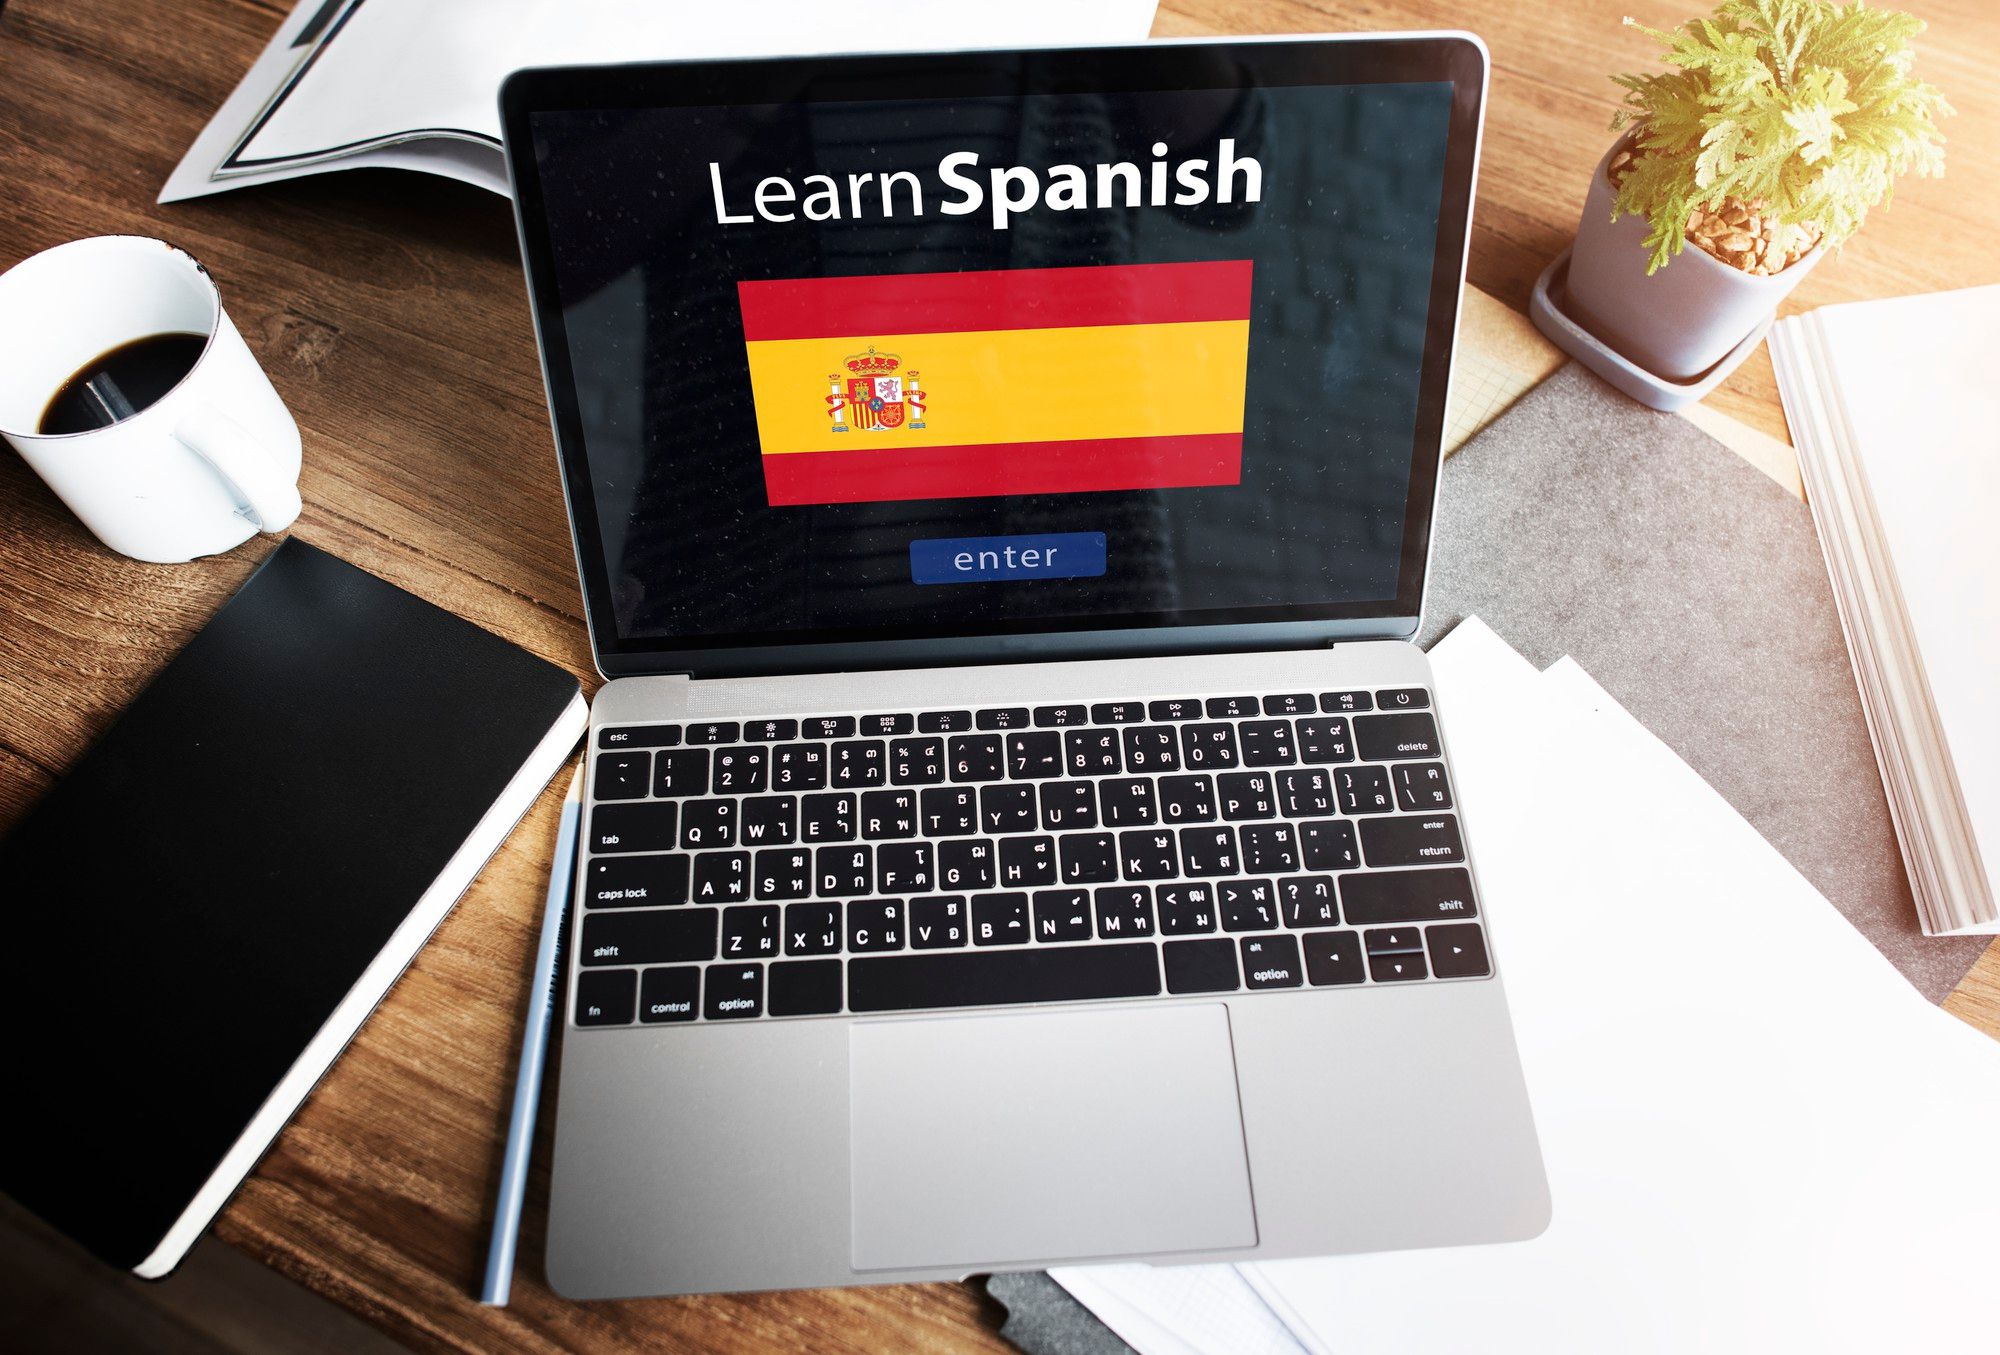 Irresistible facts about the Spanish language